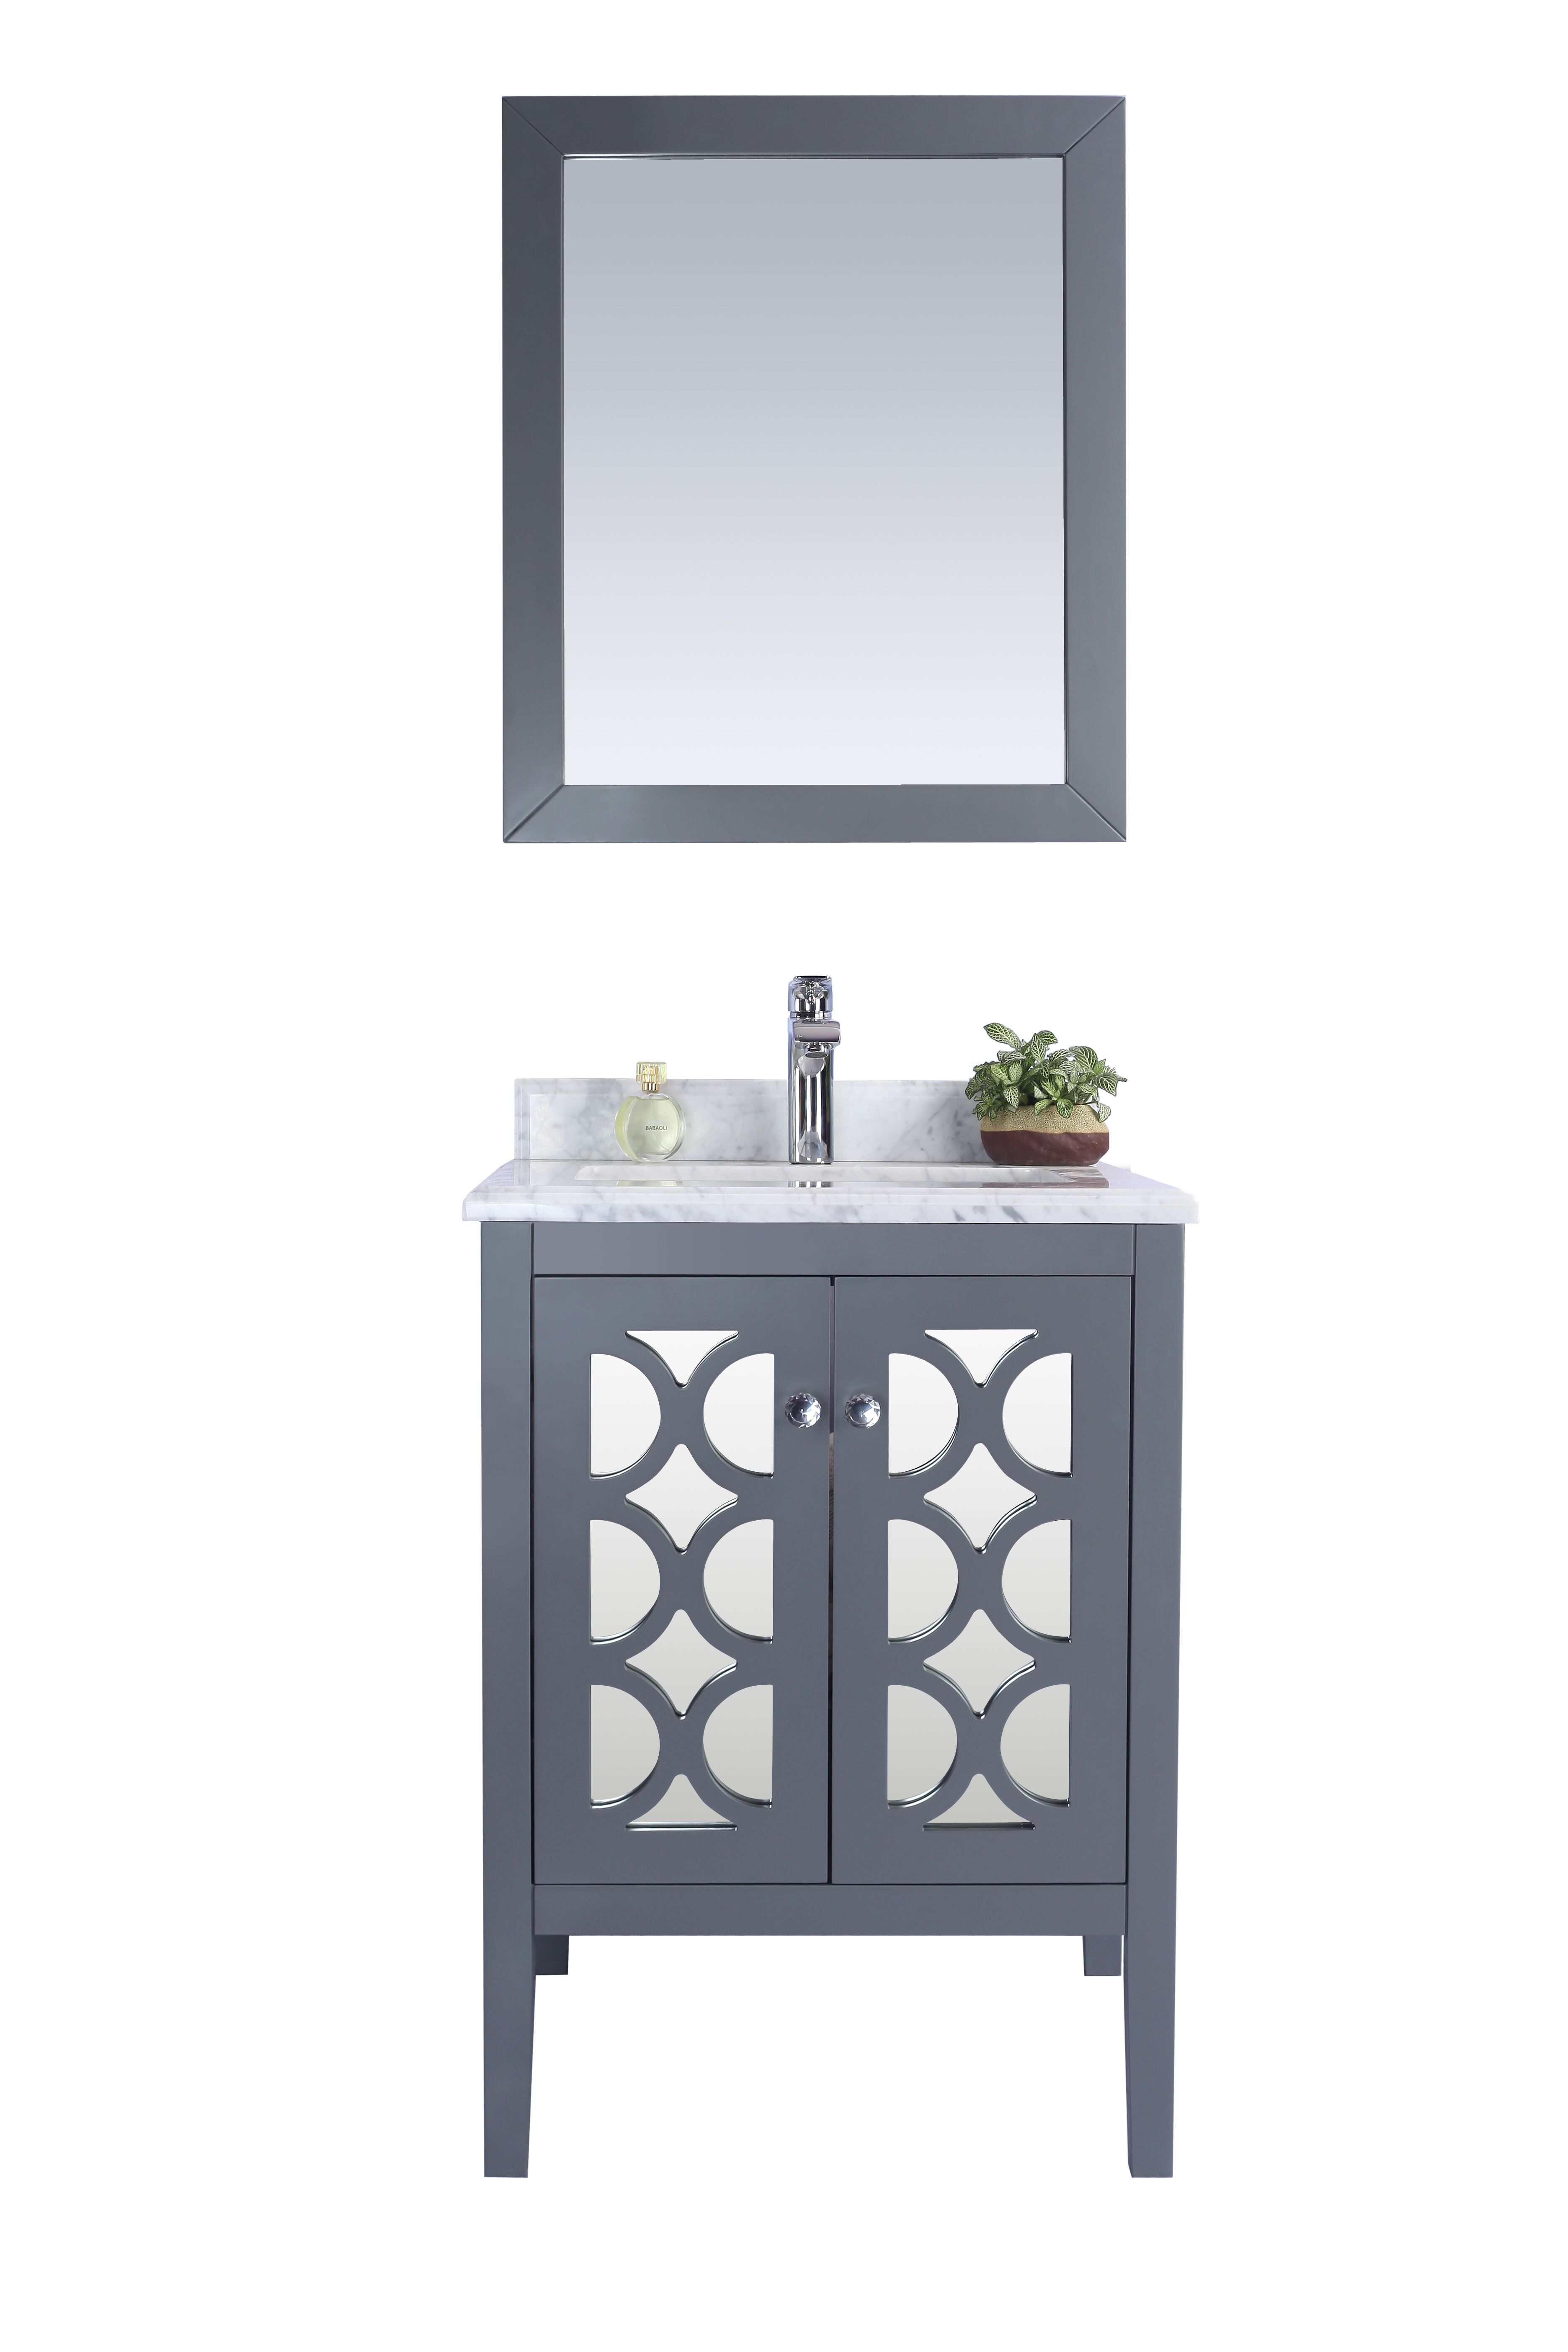 24" Single Bathroom Vanity Cabinet with Top and Color Options